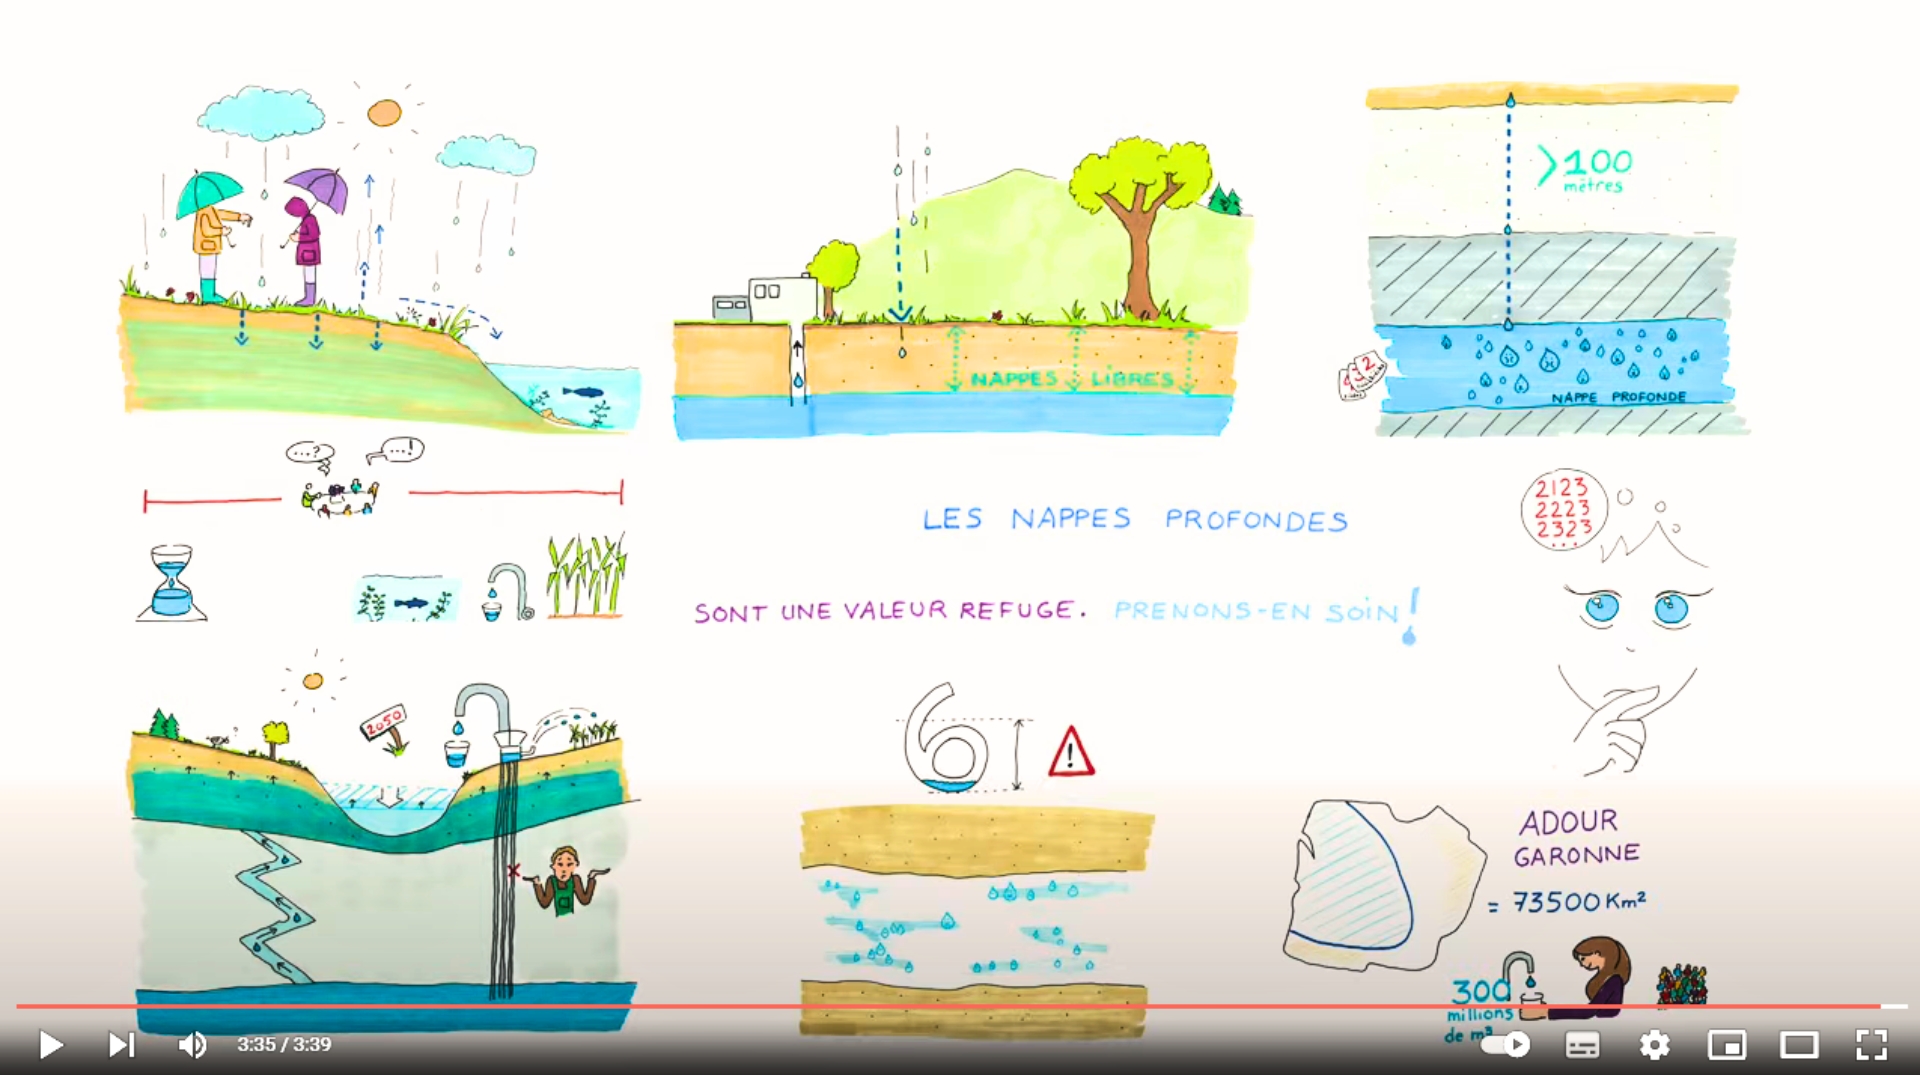 Video Draw my life - Les nappes profondes